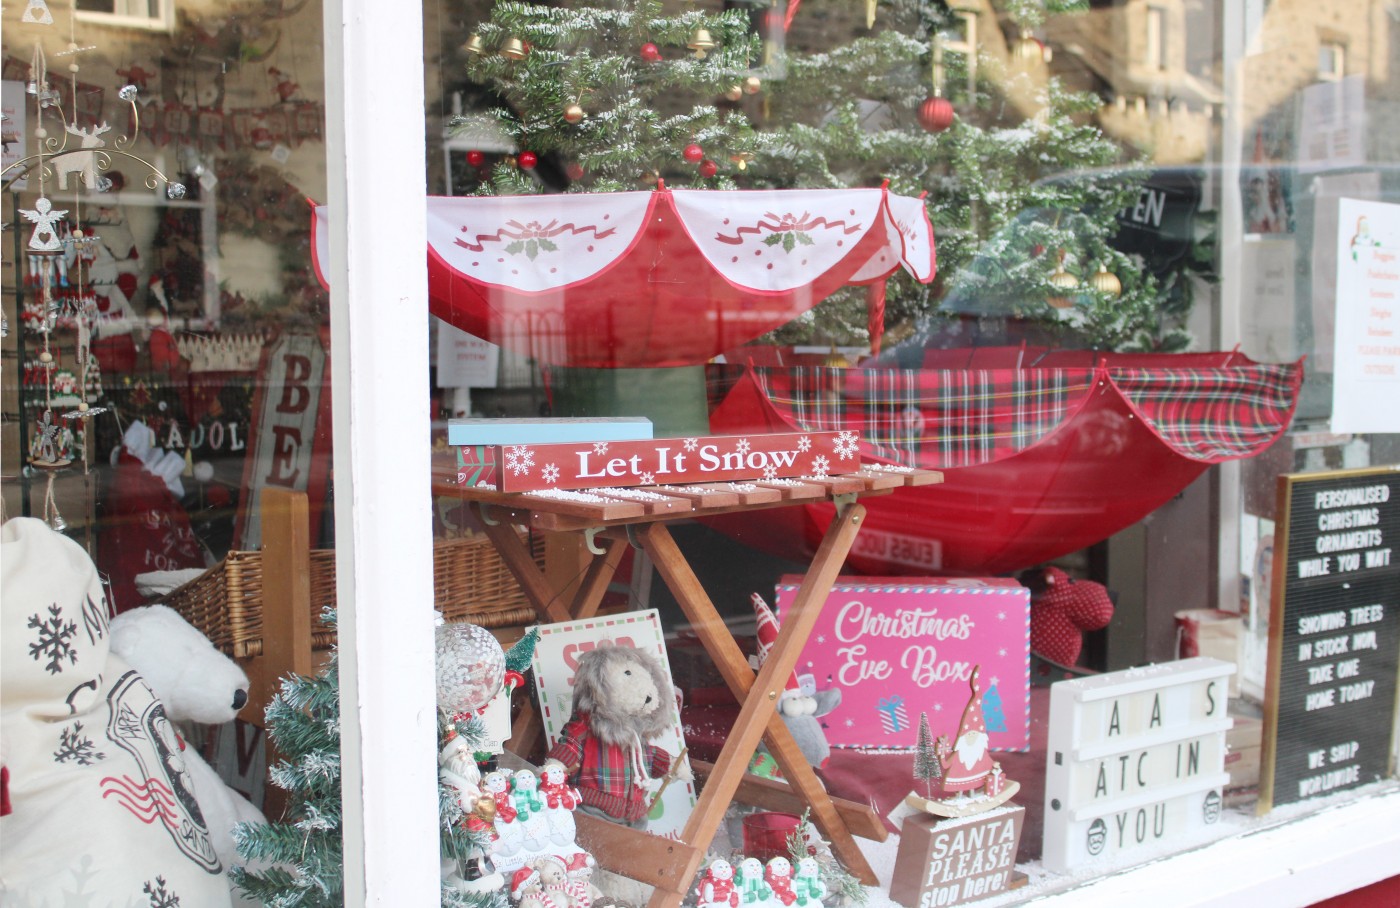 The Christmas Emporium shop in the town center of Pitlochry.